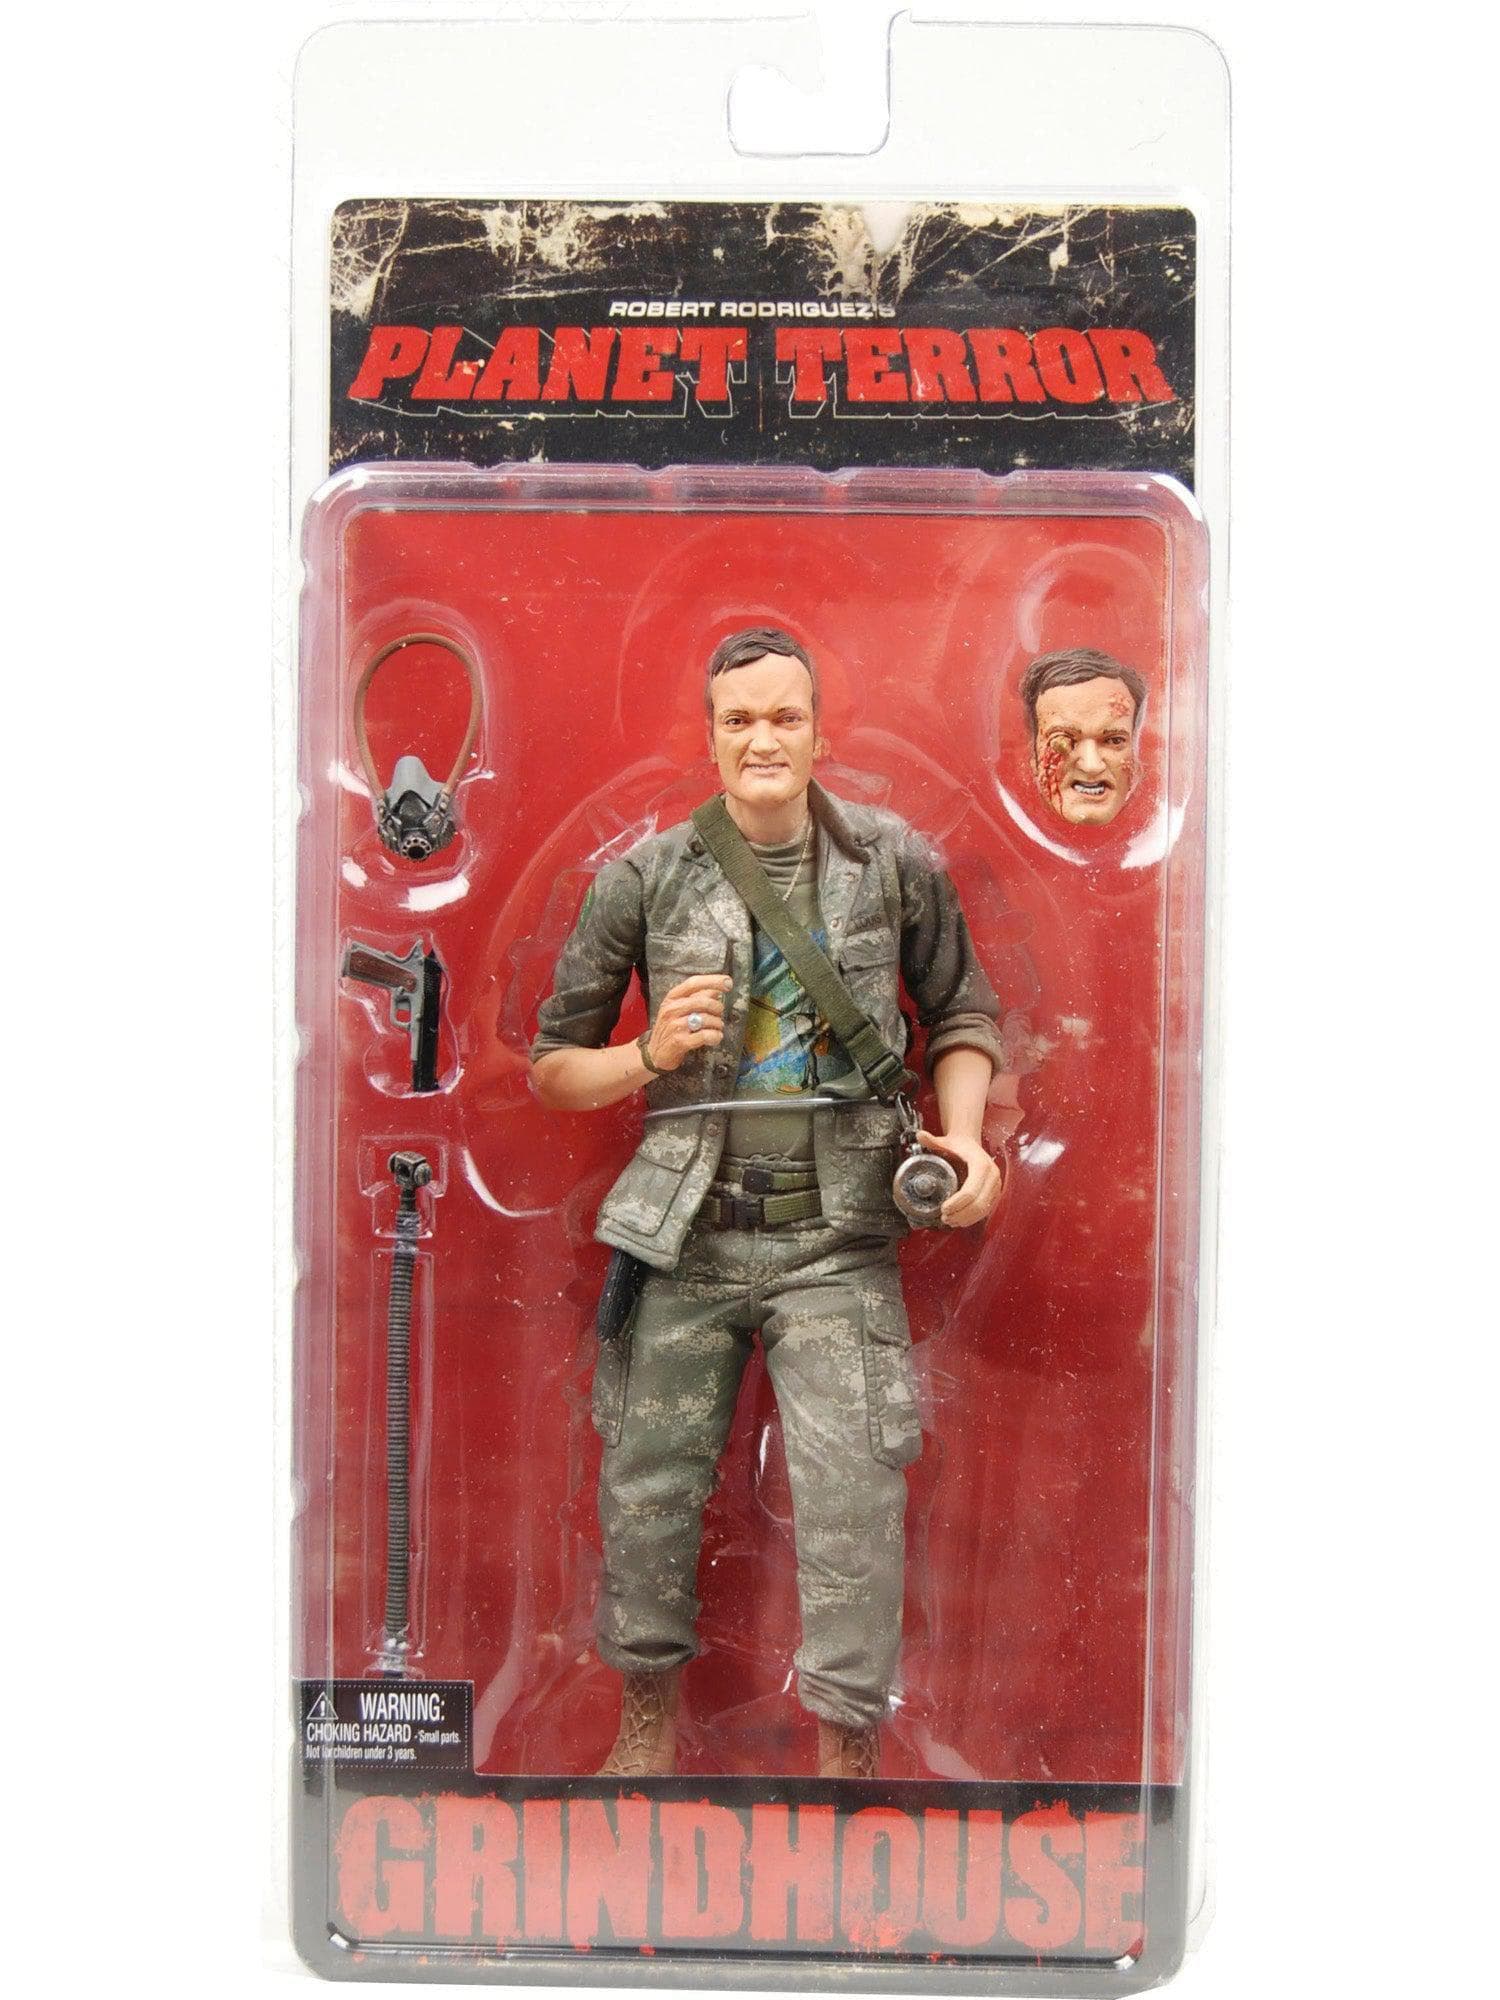 NECA - Grindhouse - 7" Scale Action Figure - Army Soldier (Quentin Tarantino) - costumes.com